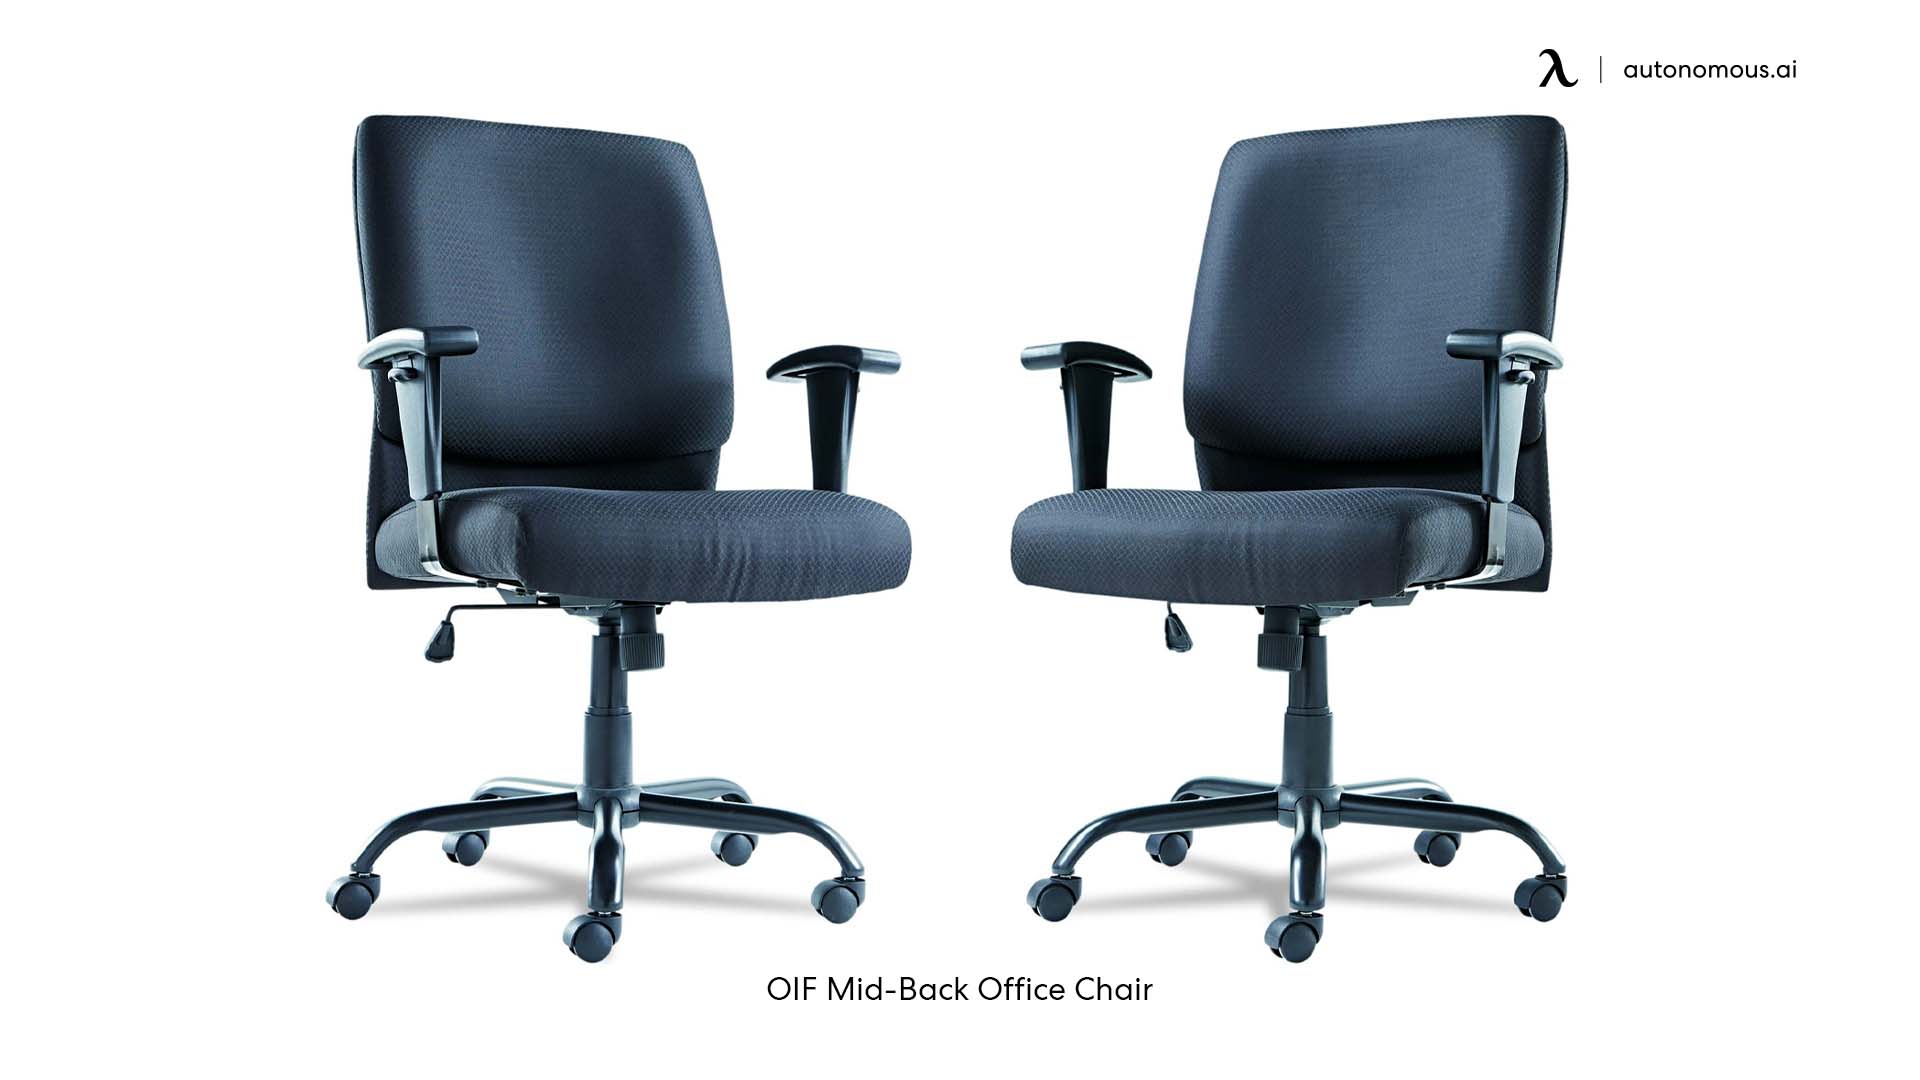 OIF Mid-Back wide office chair